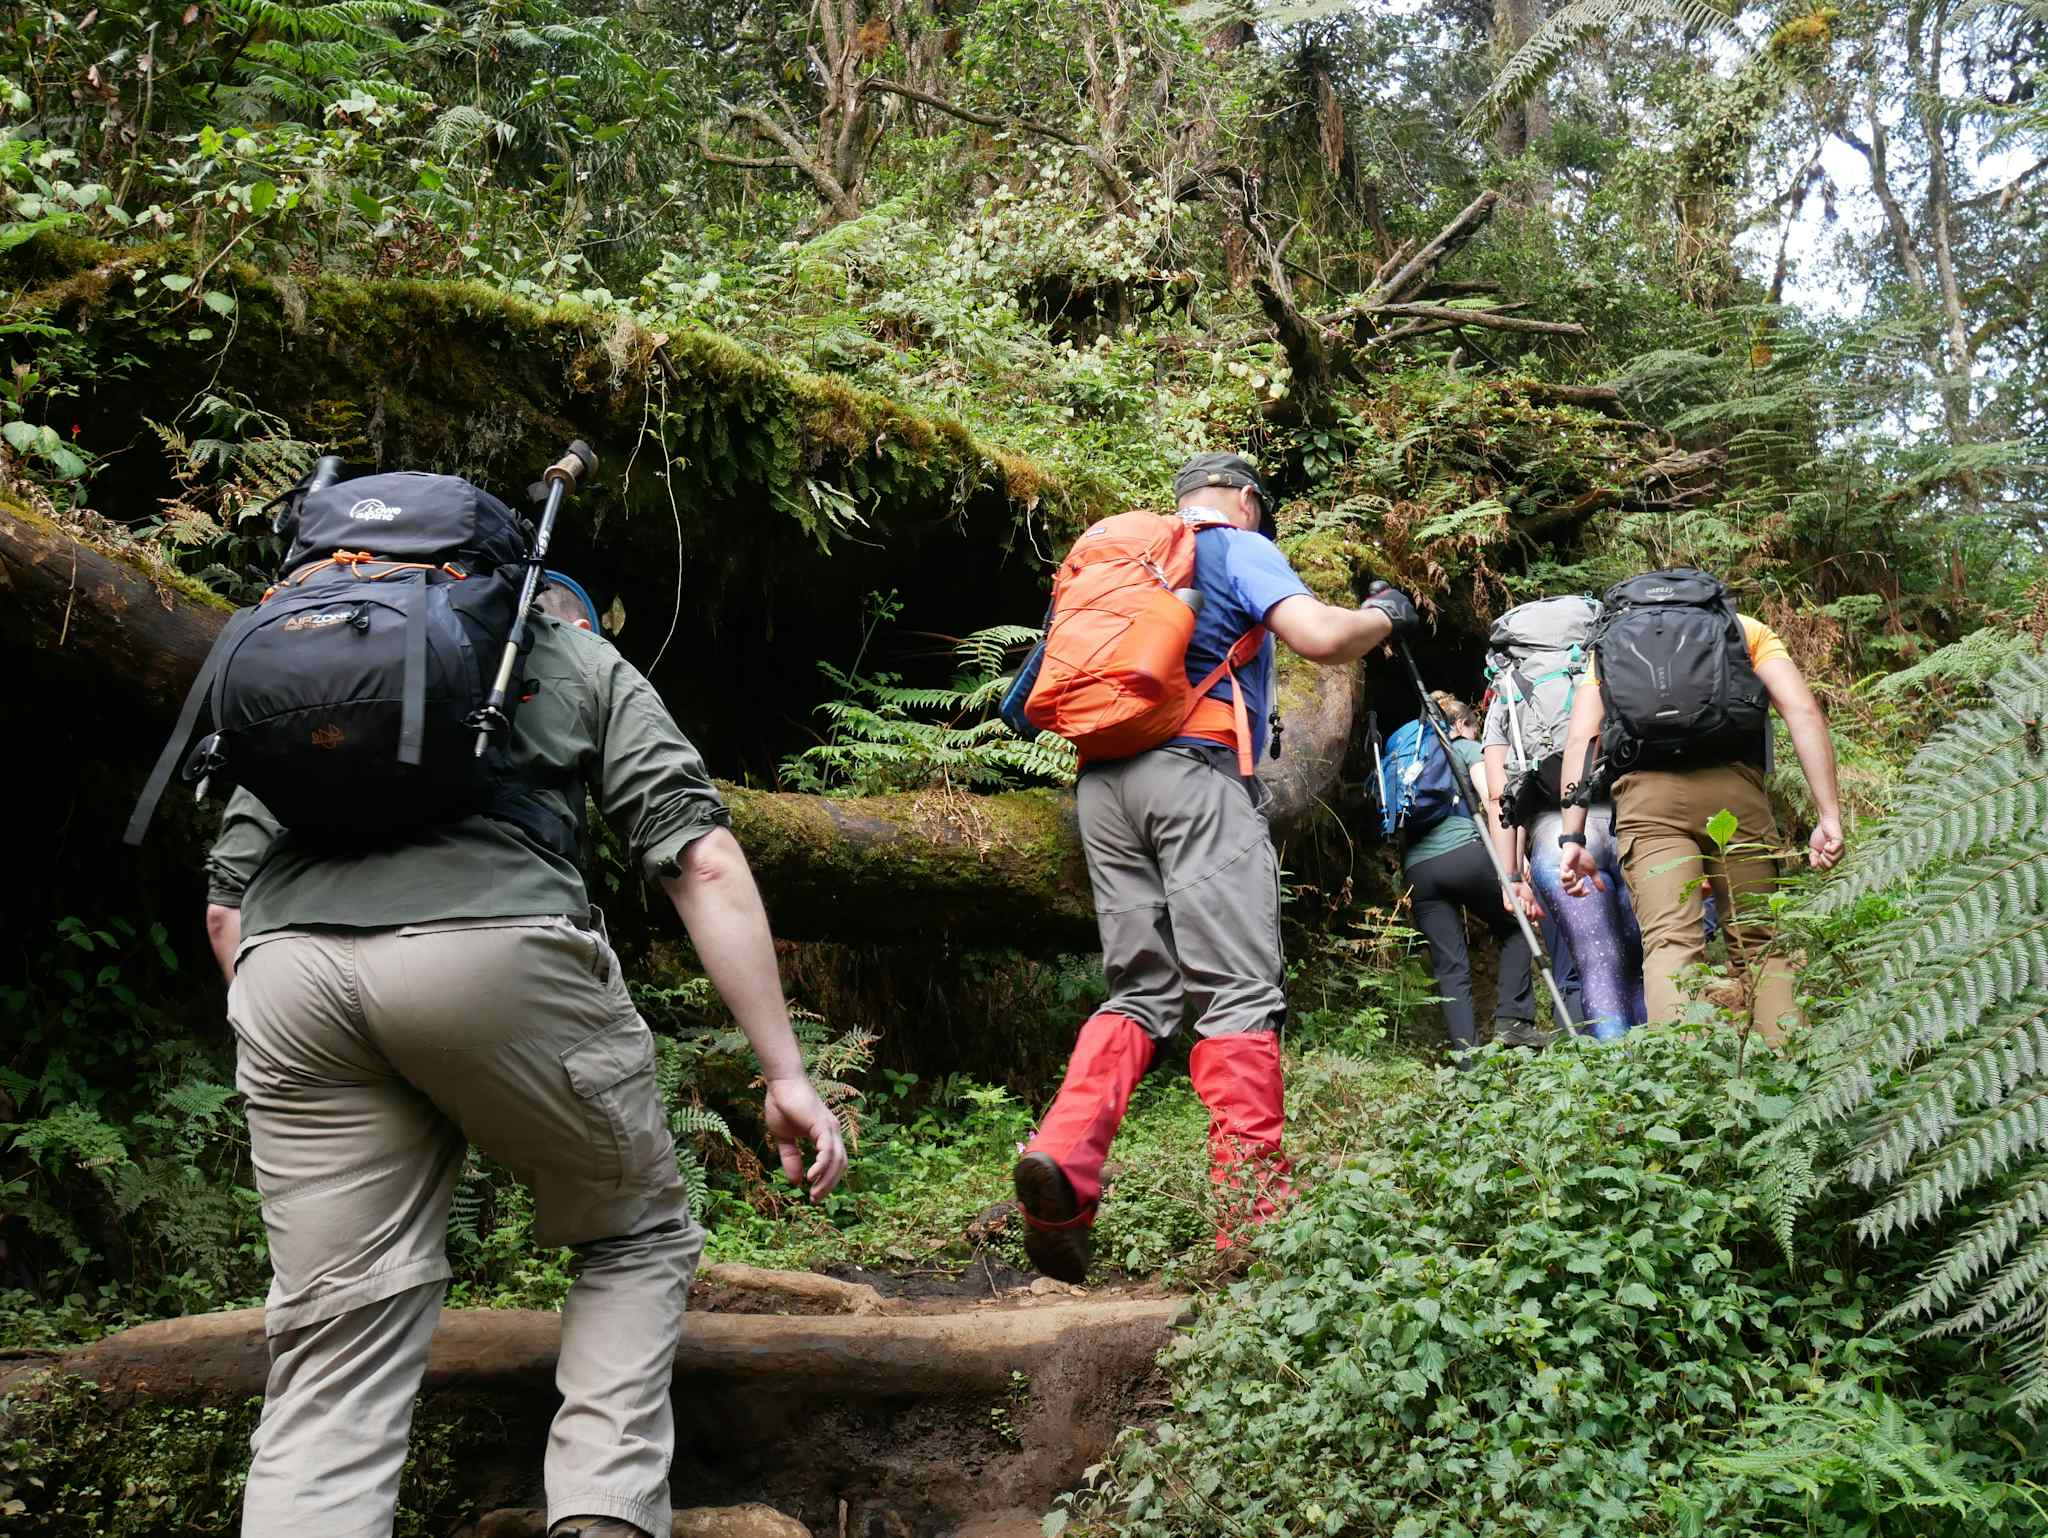 Hikers on the Machame Route trail up Mount Kilimanjaro, surrounded by forest, Tanzania.